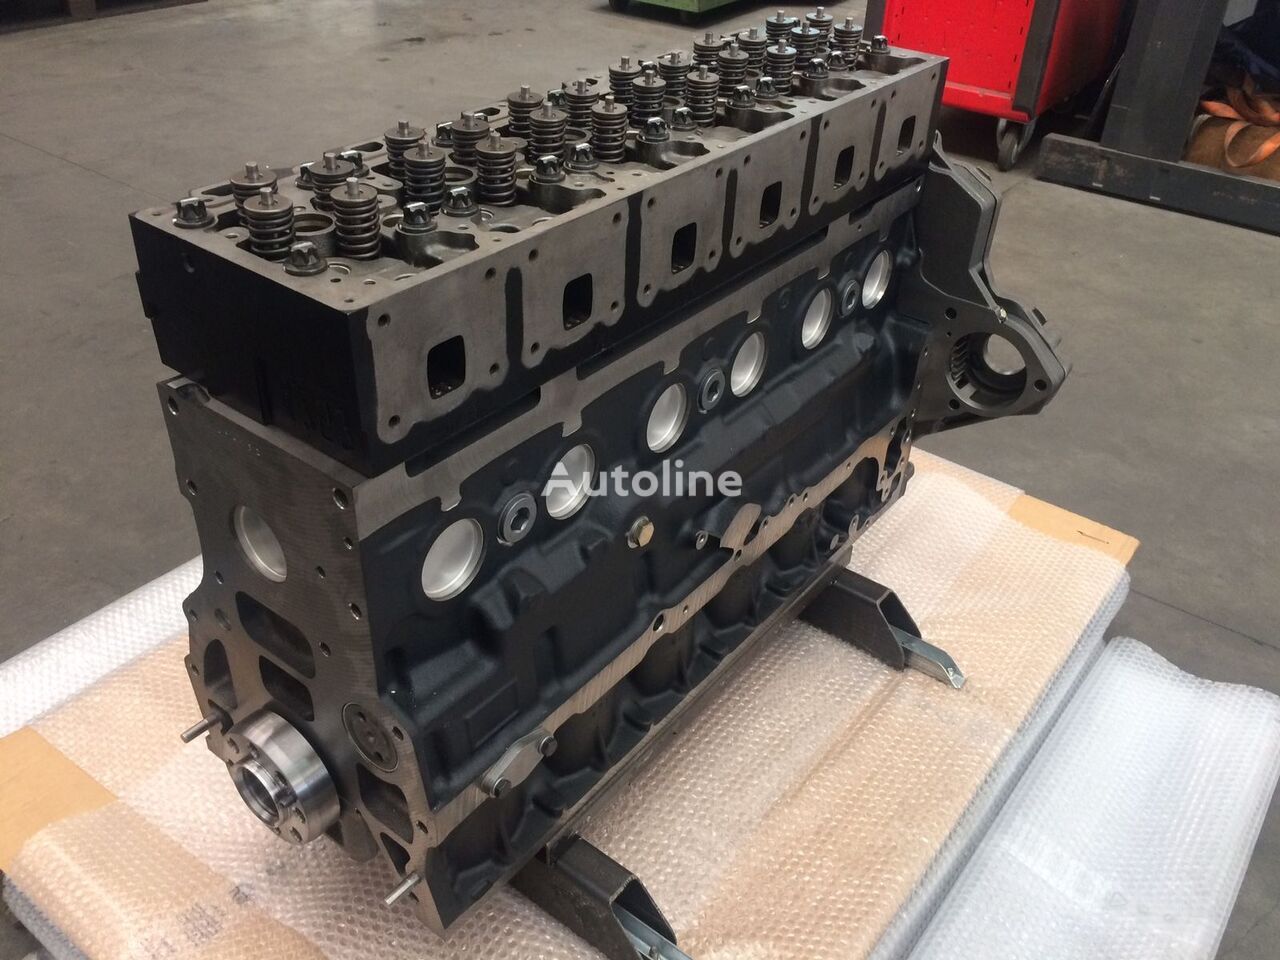 Engine for Bus MAN MOTORE D0836LUH41 - 240CV - EURO 3 - BUS - Orizzontale: picture 8